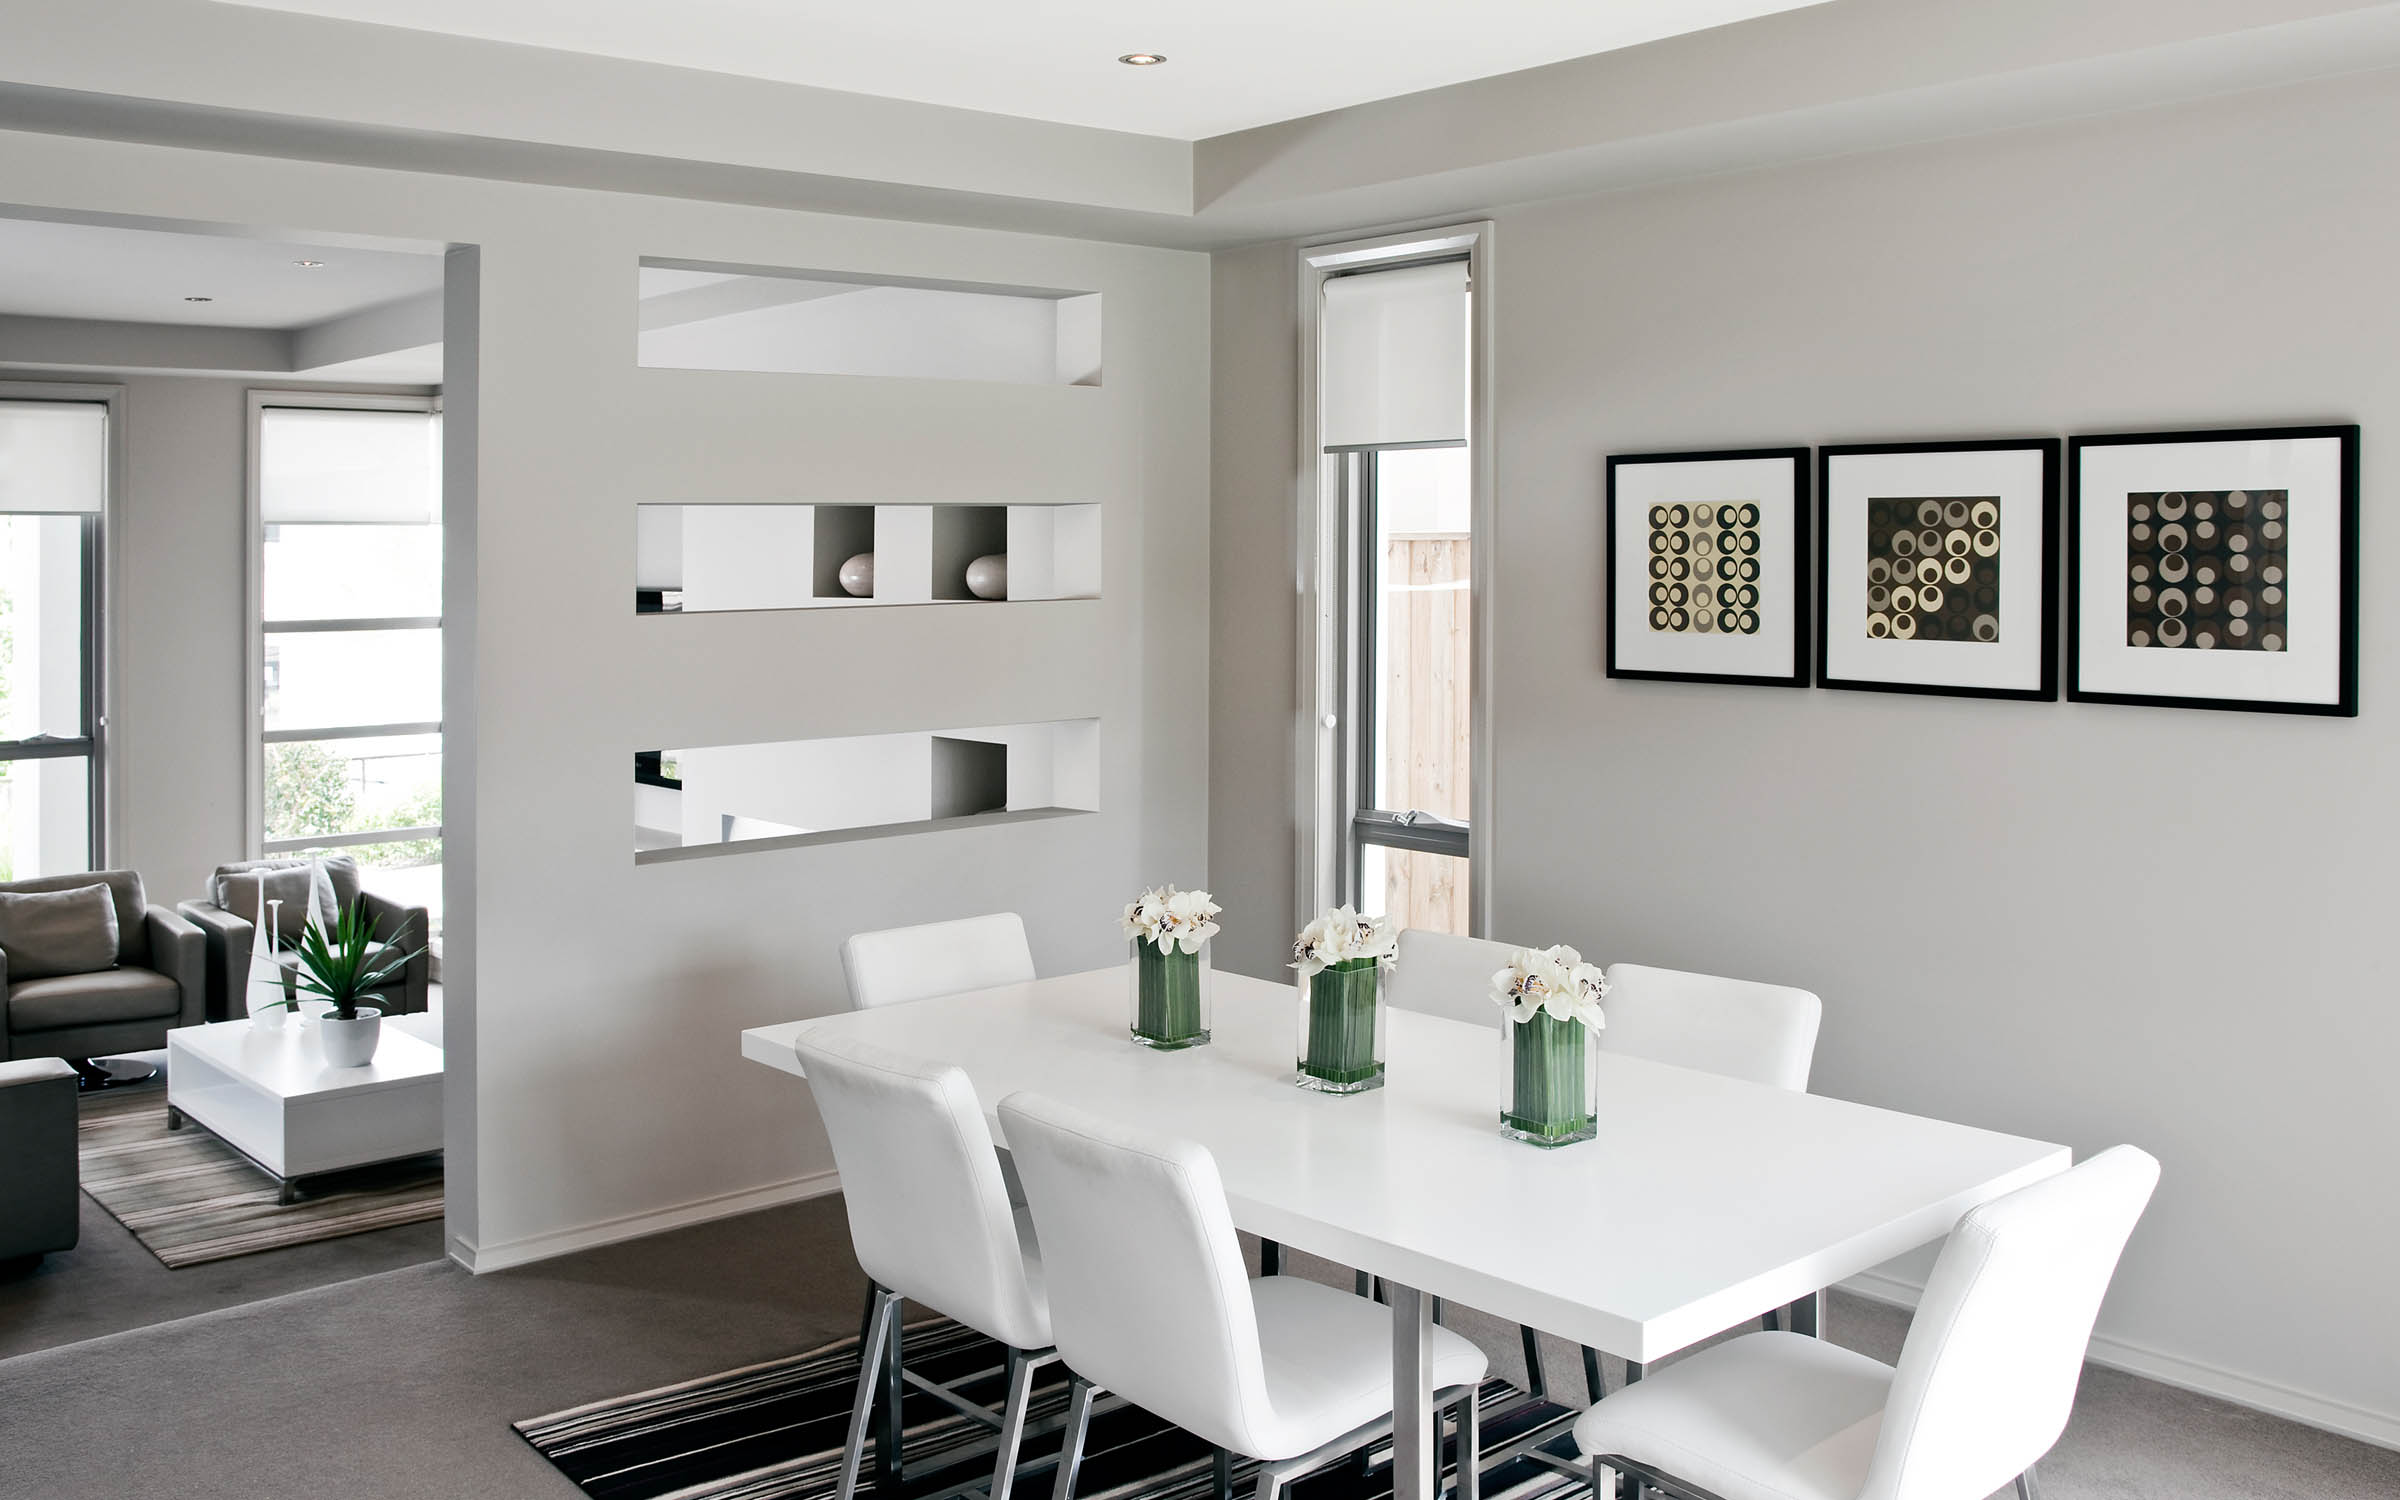 Dining table in room filled with neutral black, grey, and white tones. Artworks on walls.